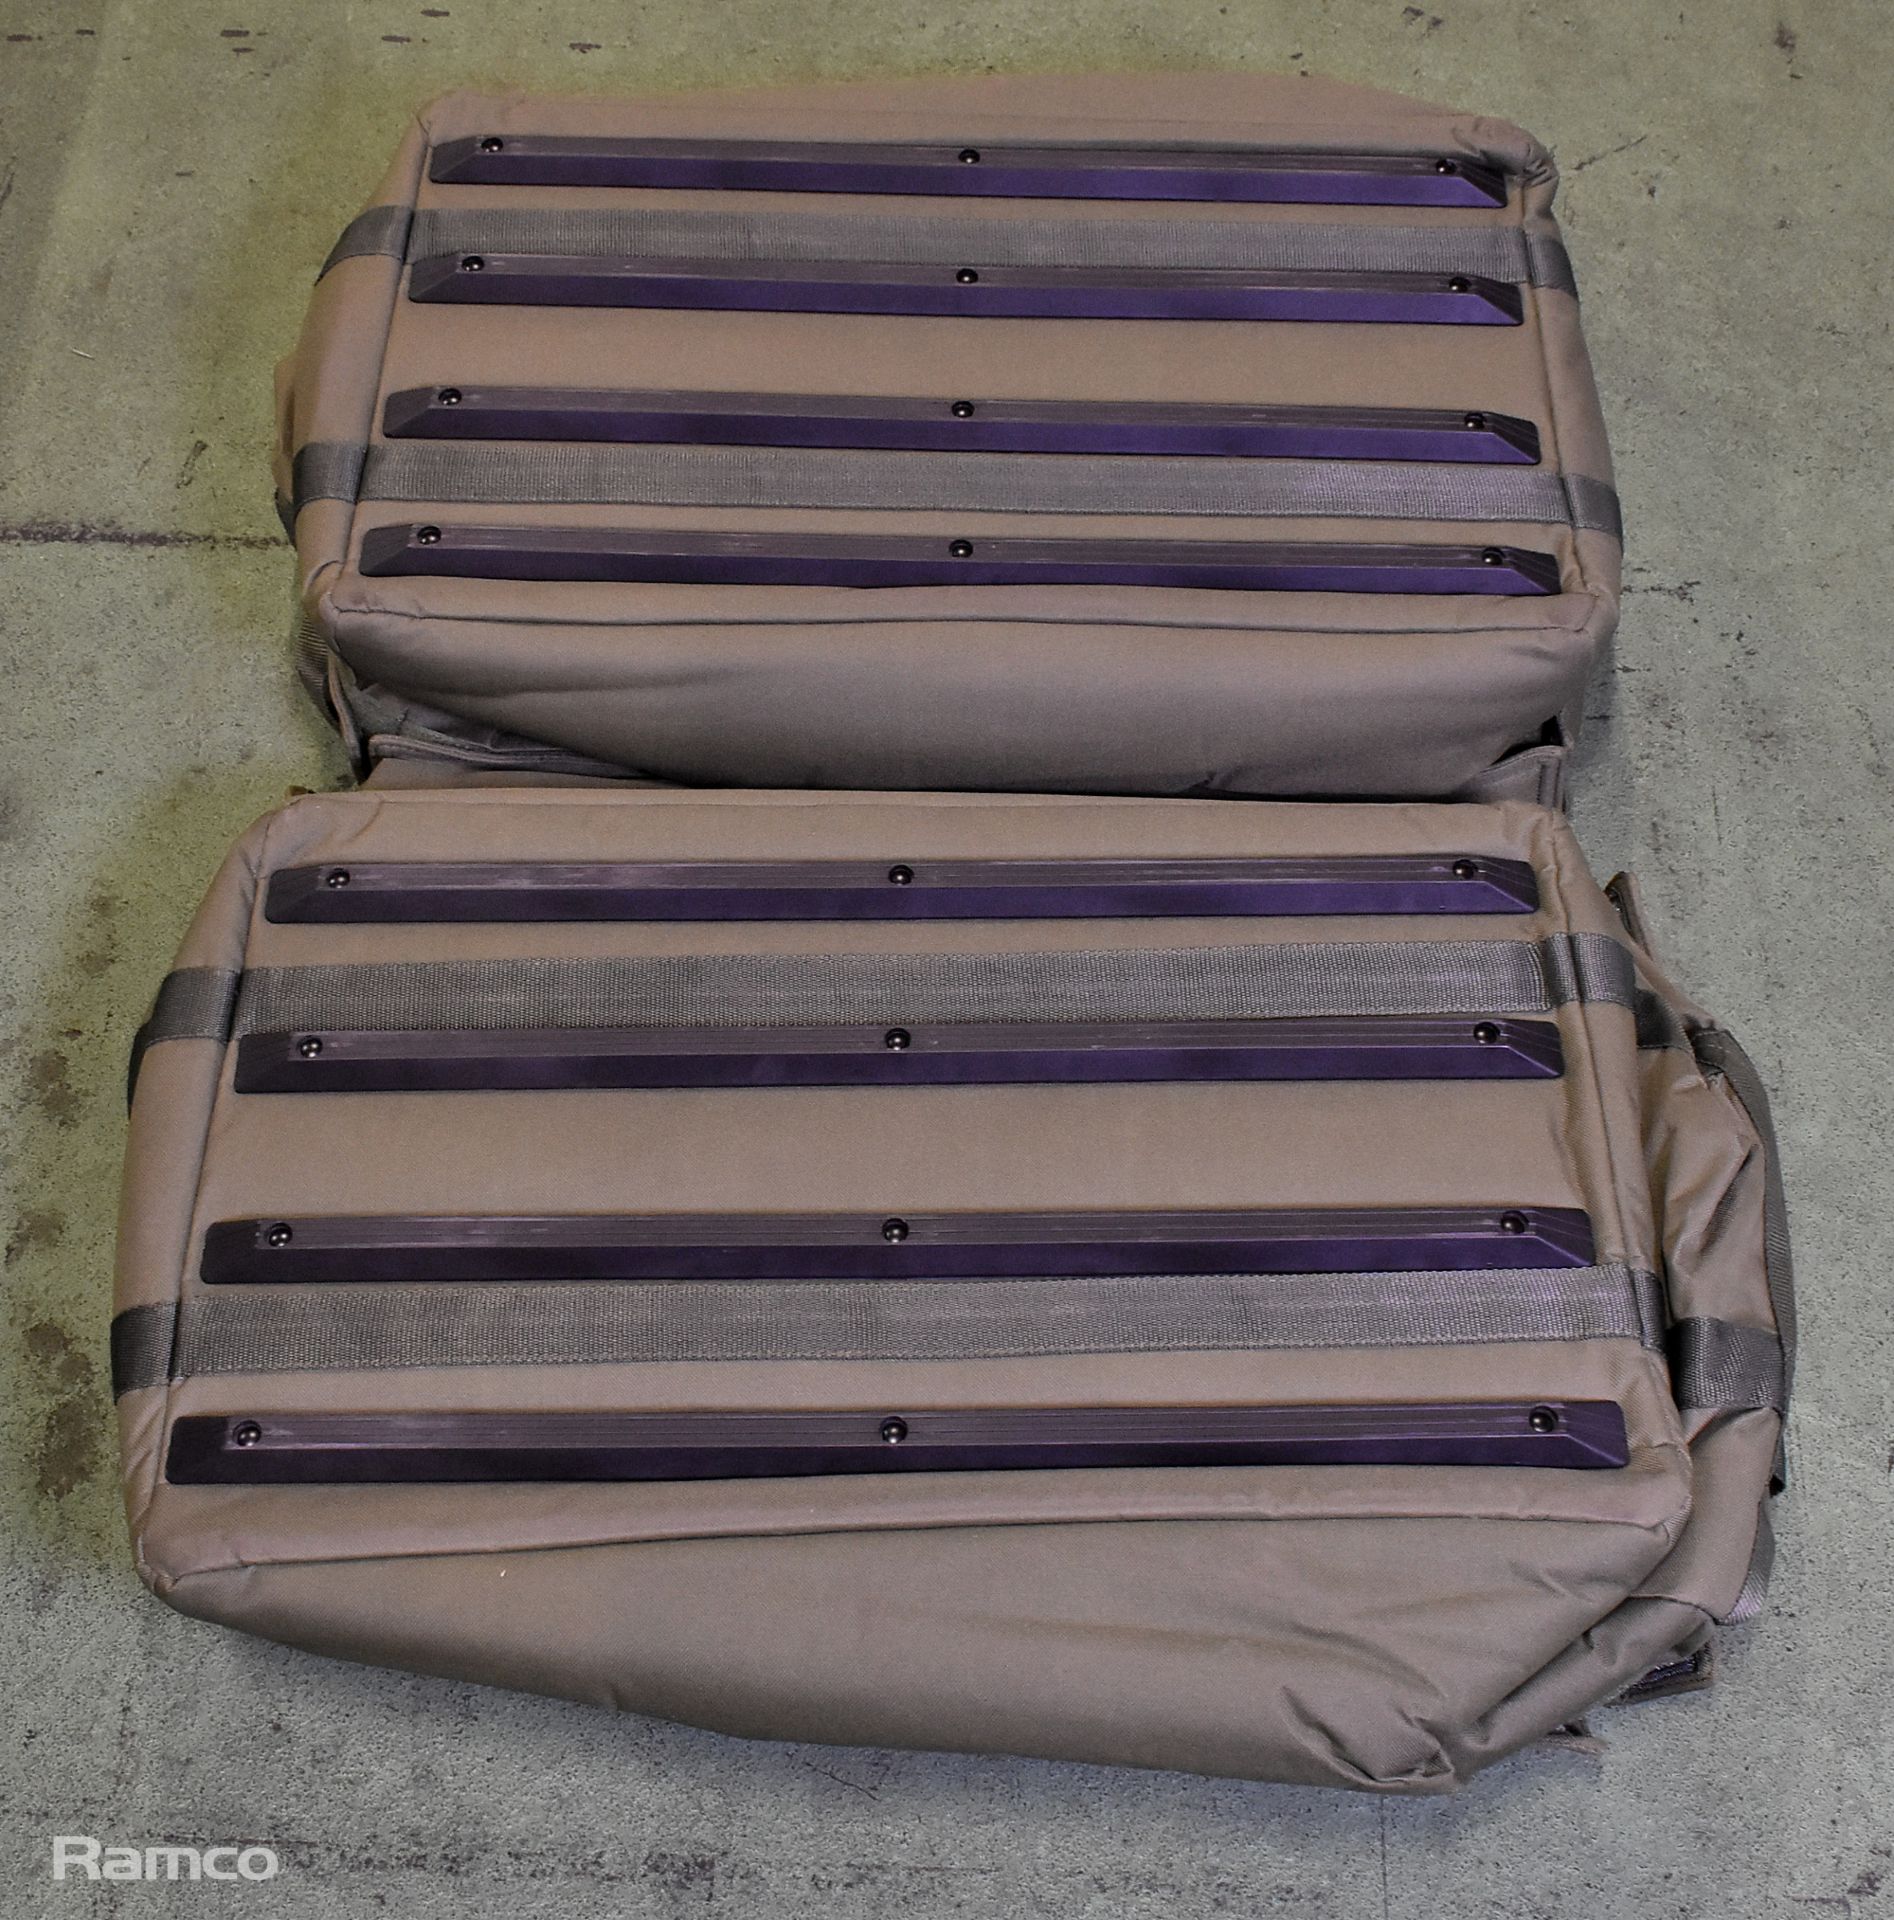 2x Thermal carry bags - L 70 x W 44 x H 42cm - Image 2 of 2